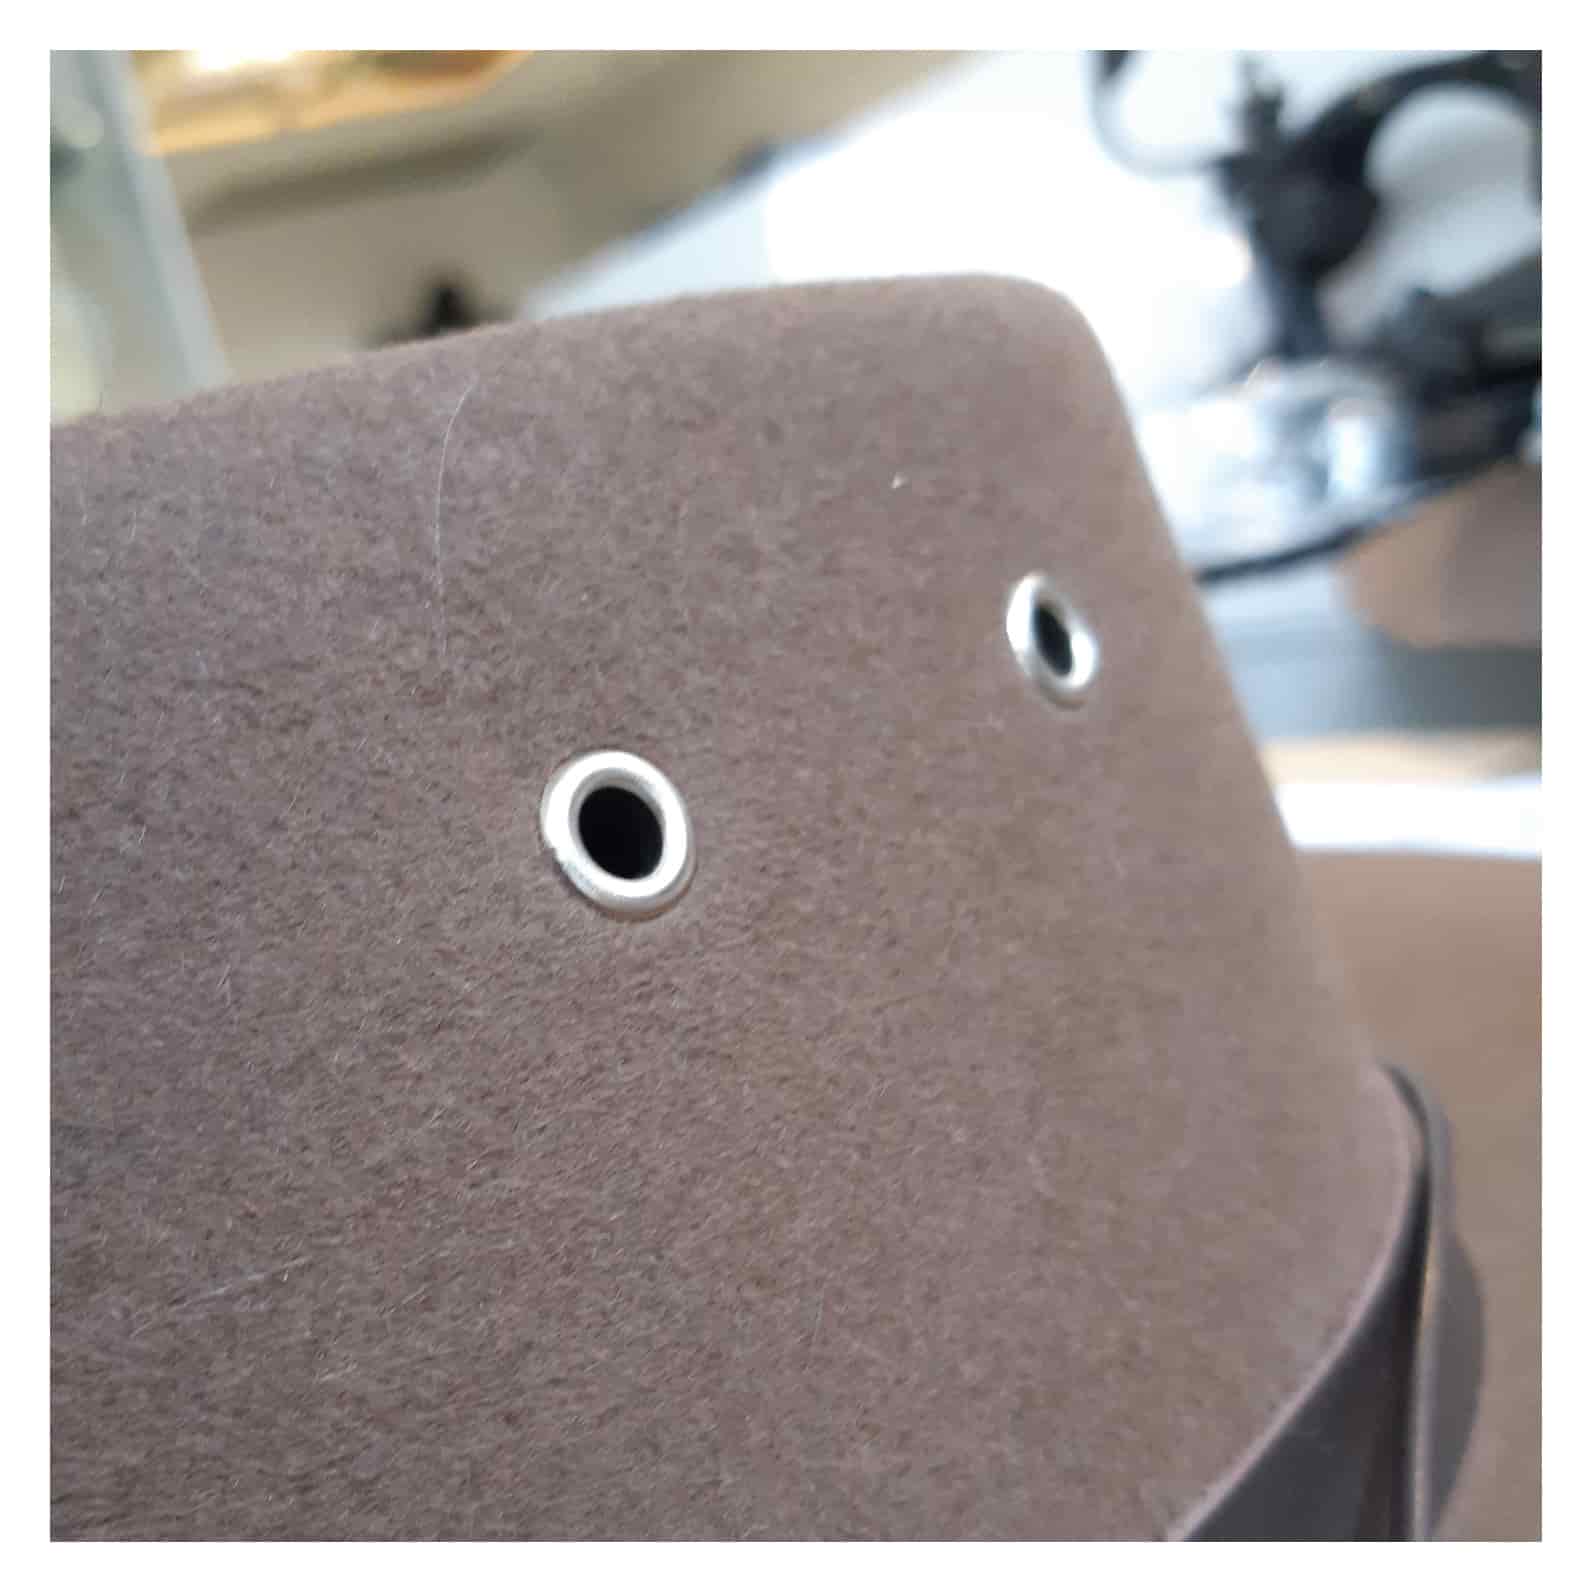 Agnoulita Hats Ventilation Holes Example - How do they look?